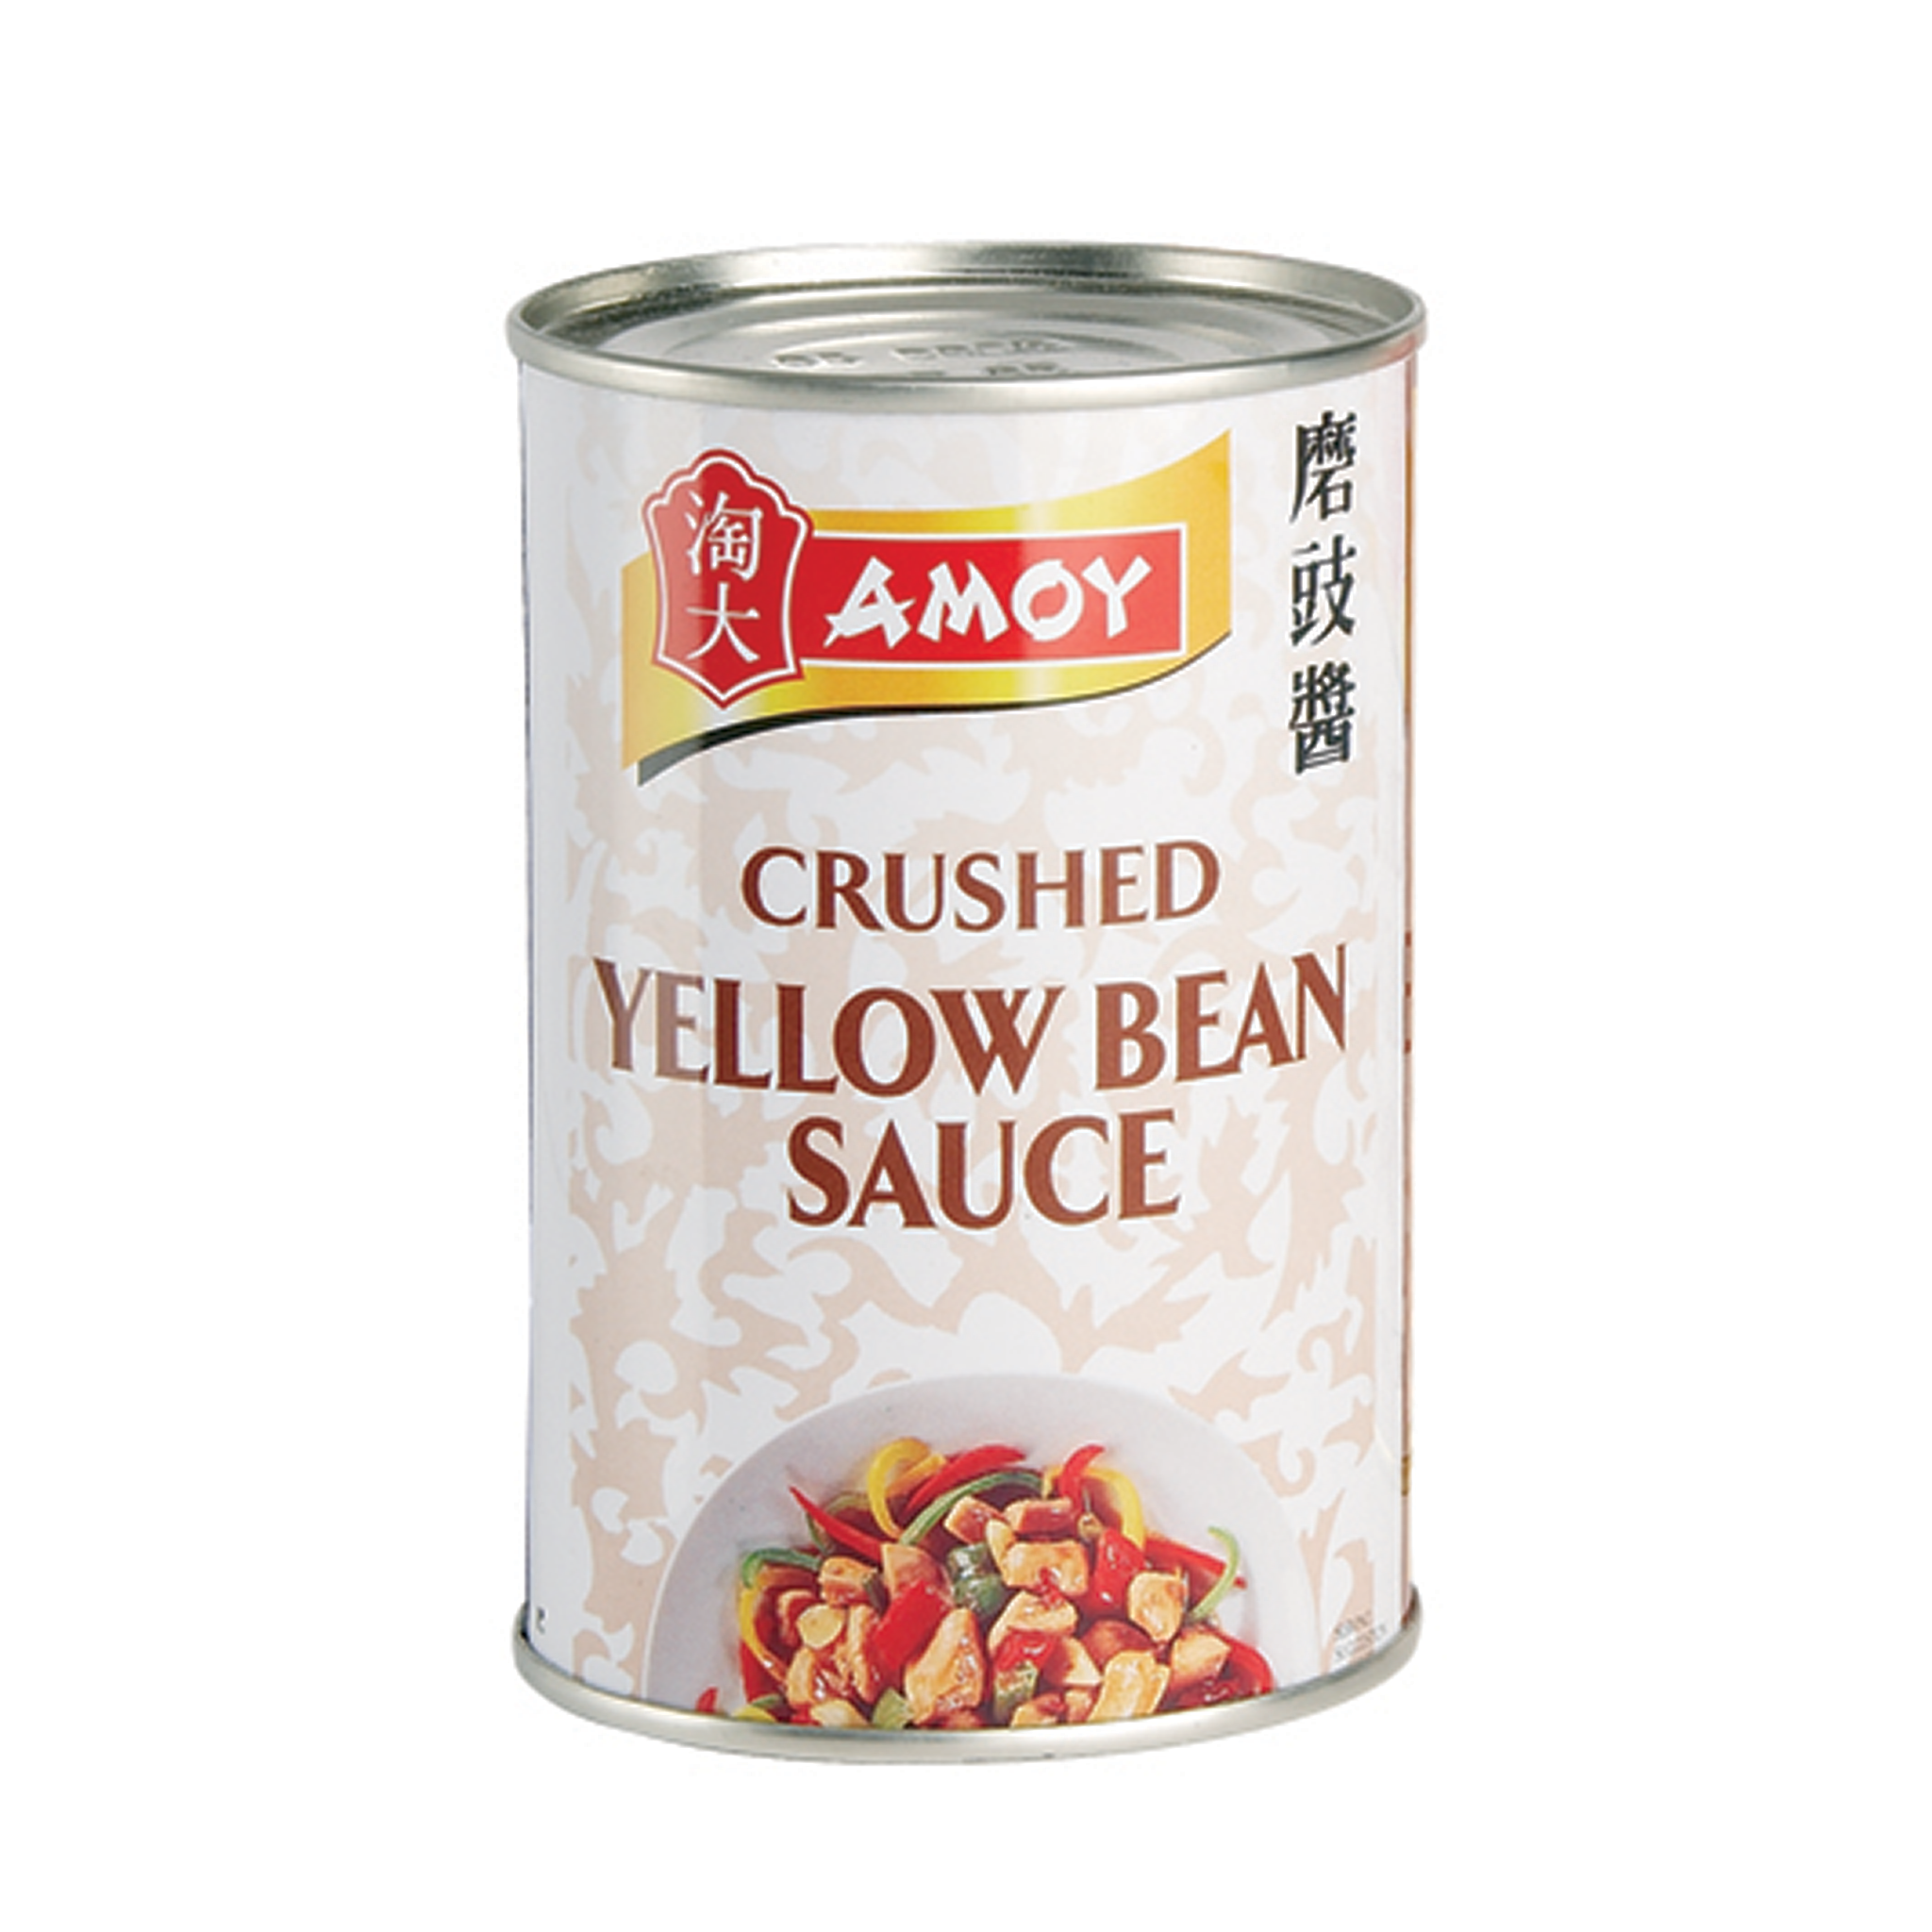 Crushed Yellow Bean Sauce 450g by Amoy